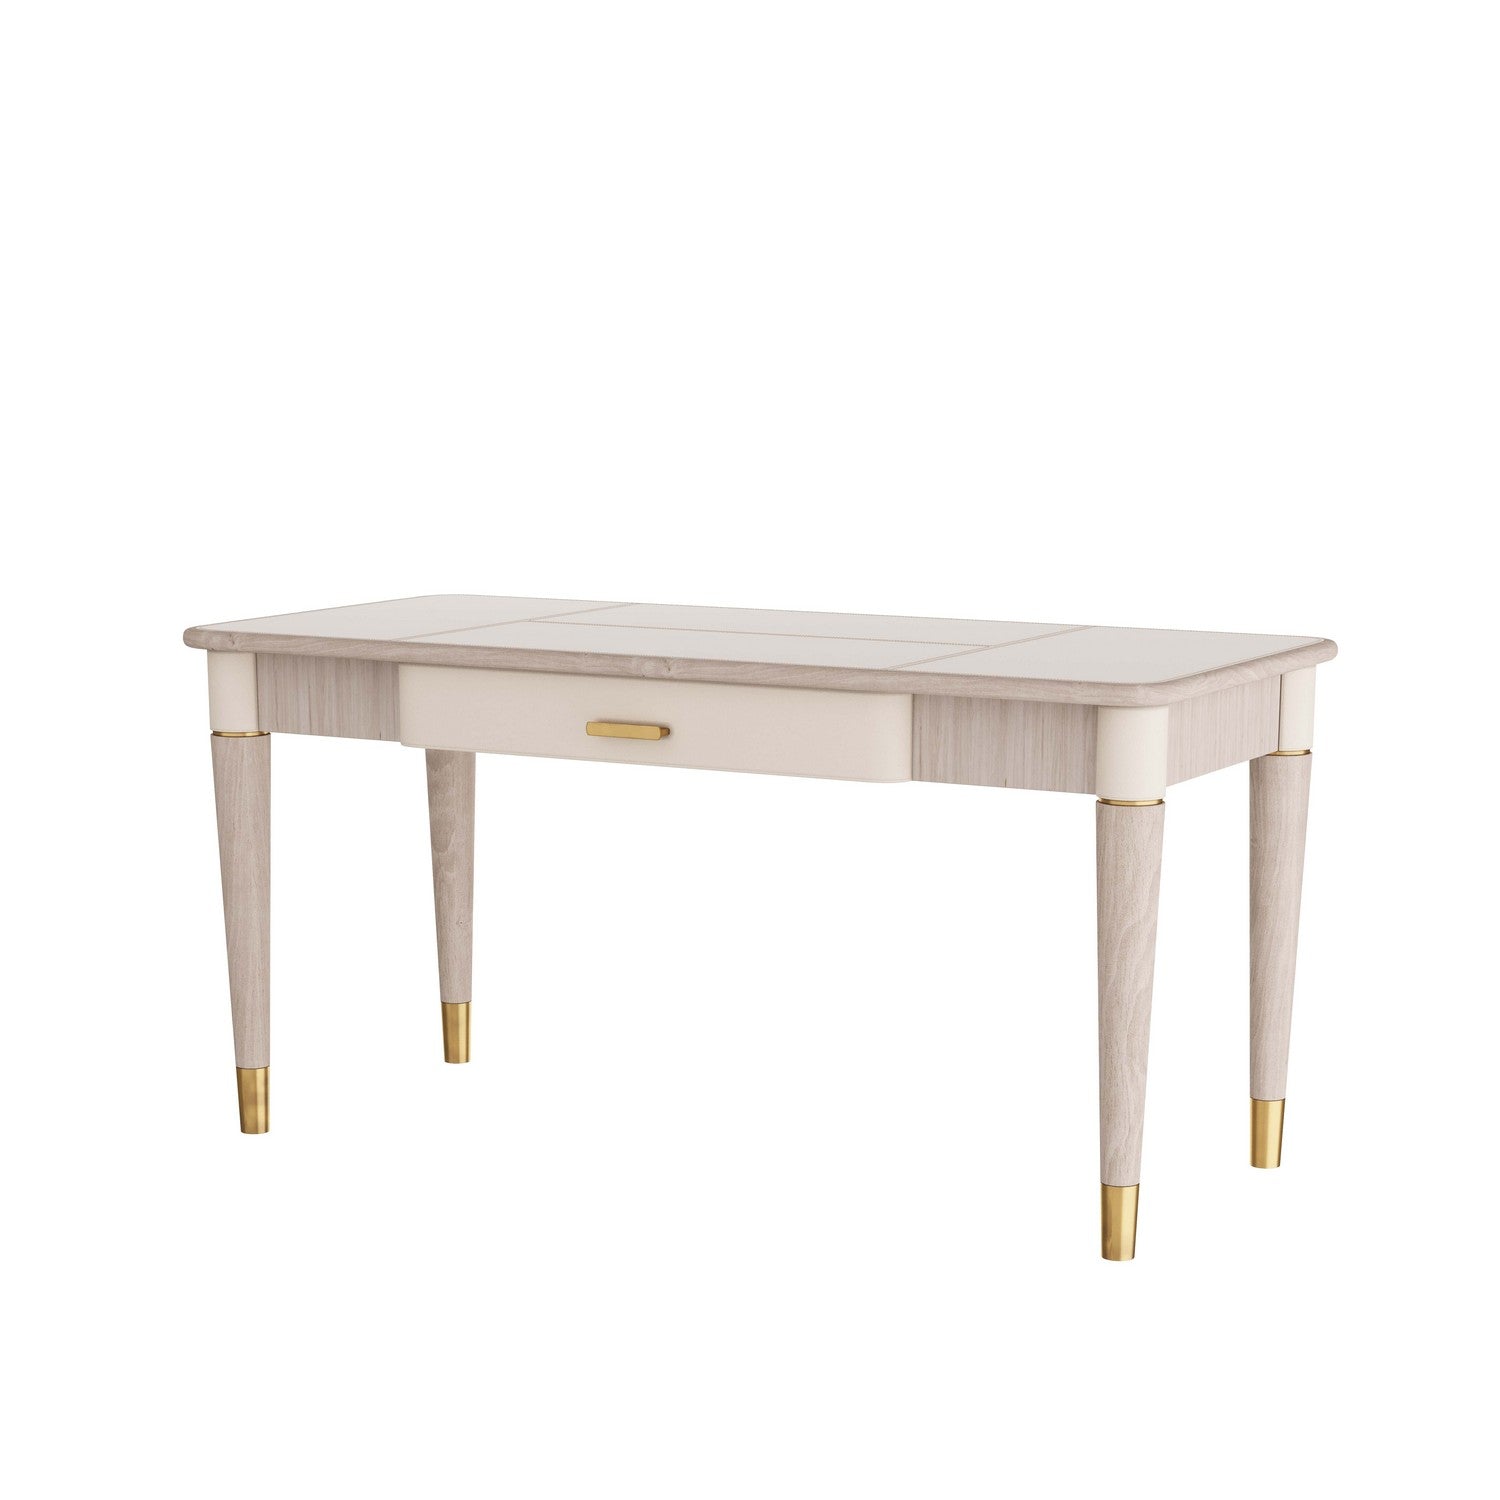 Desk from the Willis collection in Ivory finish